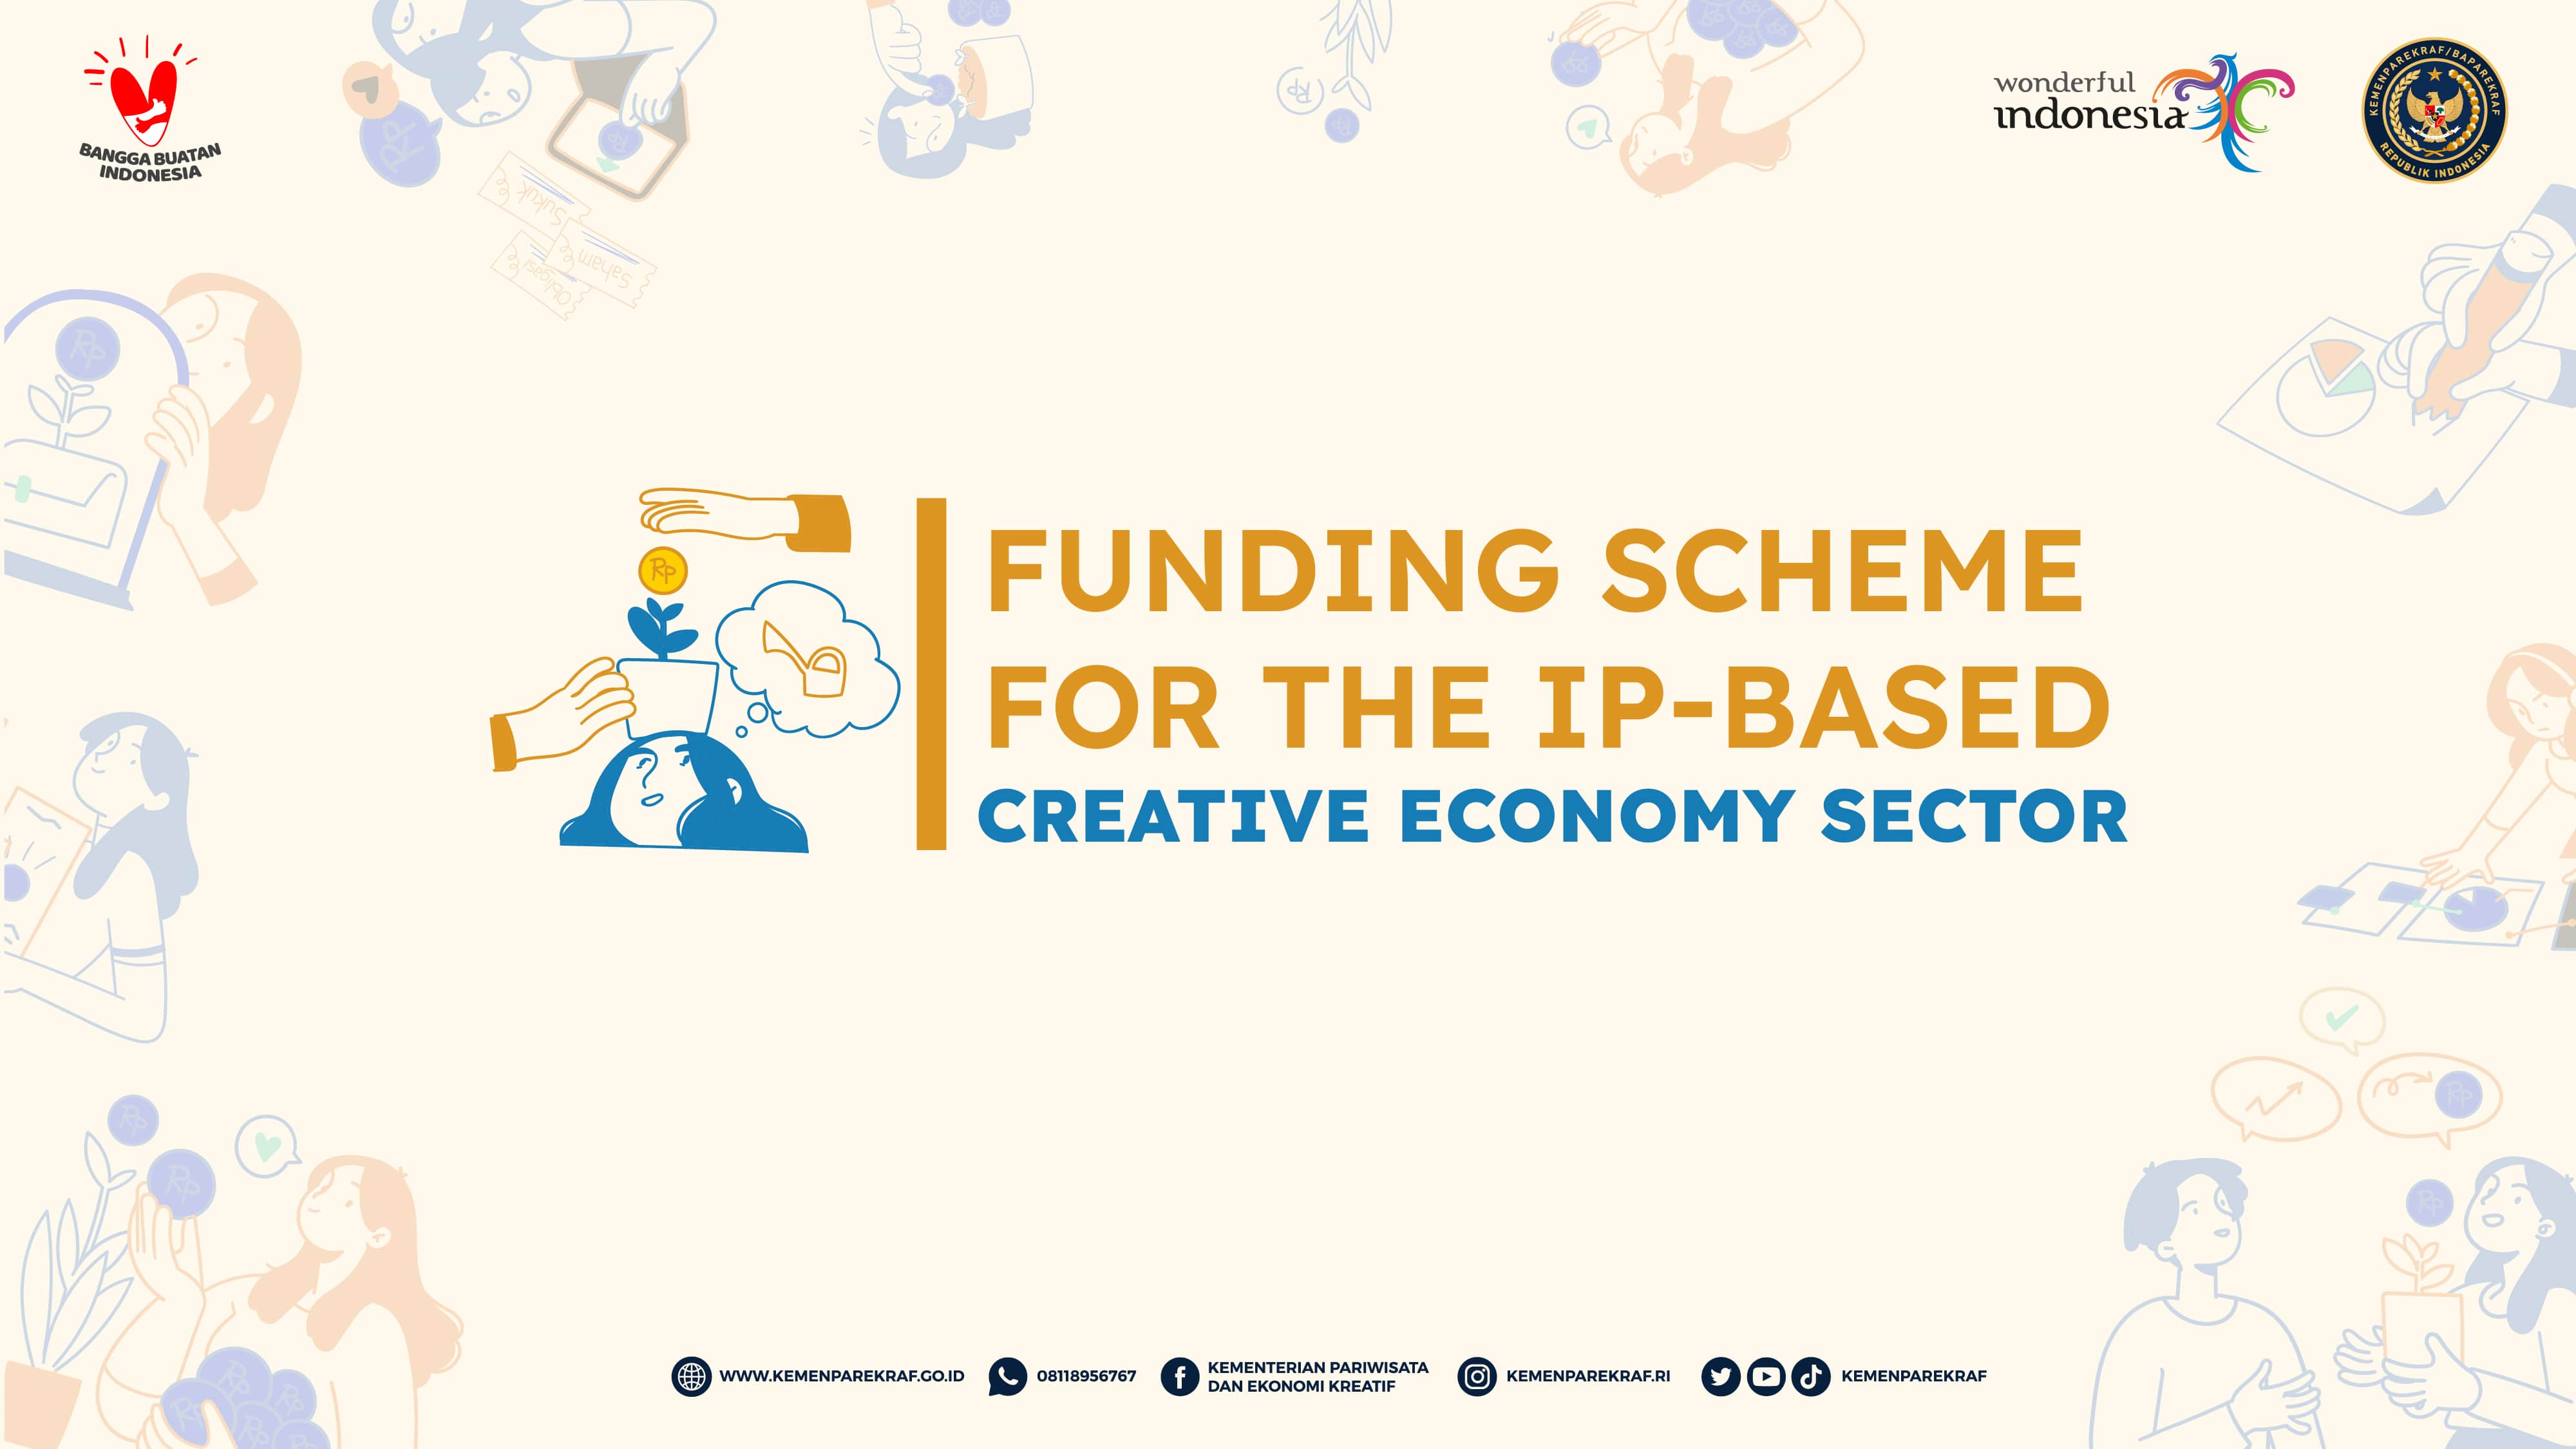 Funding Scheme For the IP-based Creative Economy Sector